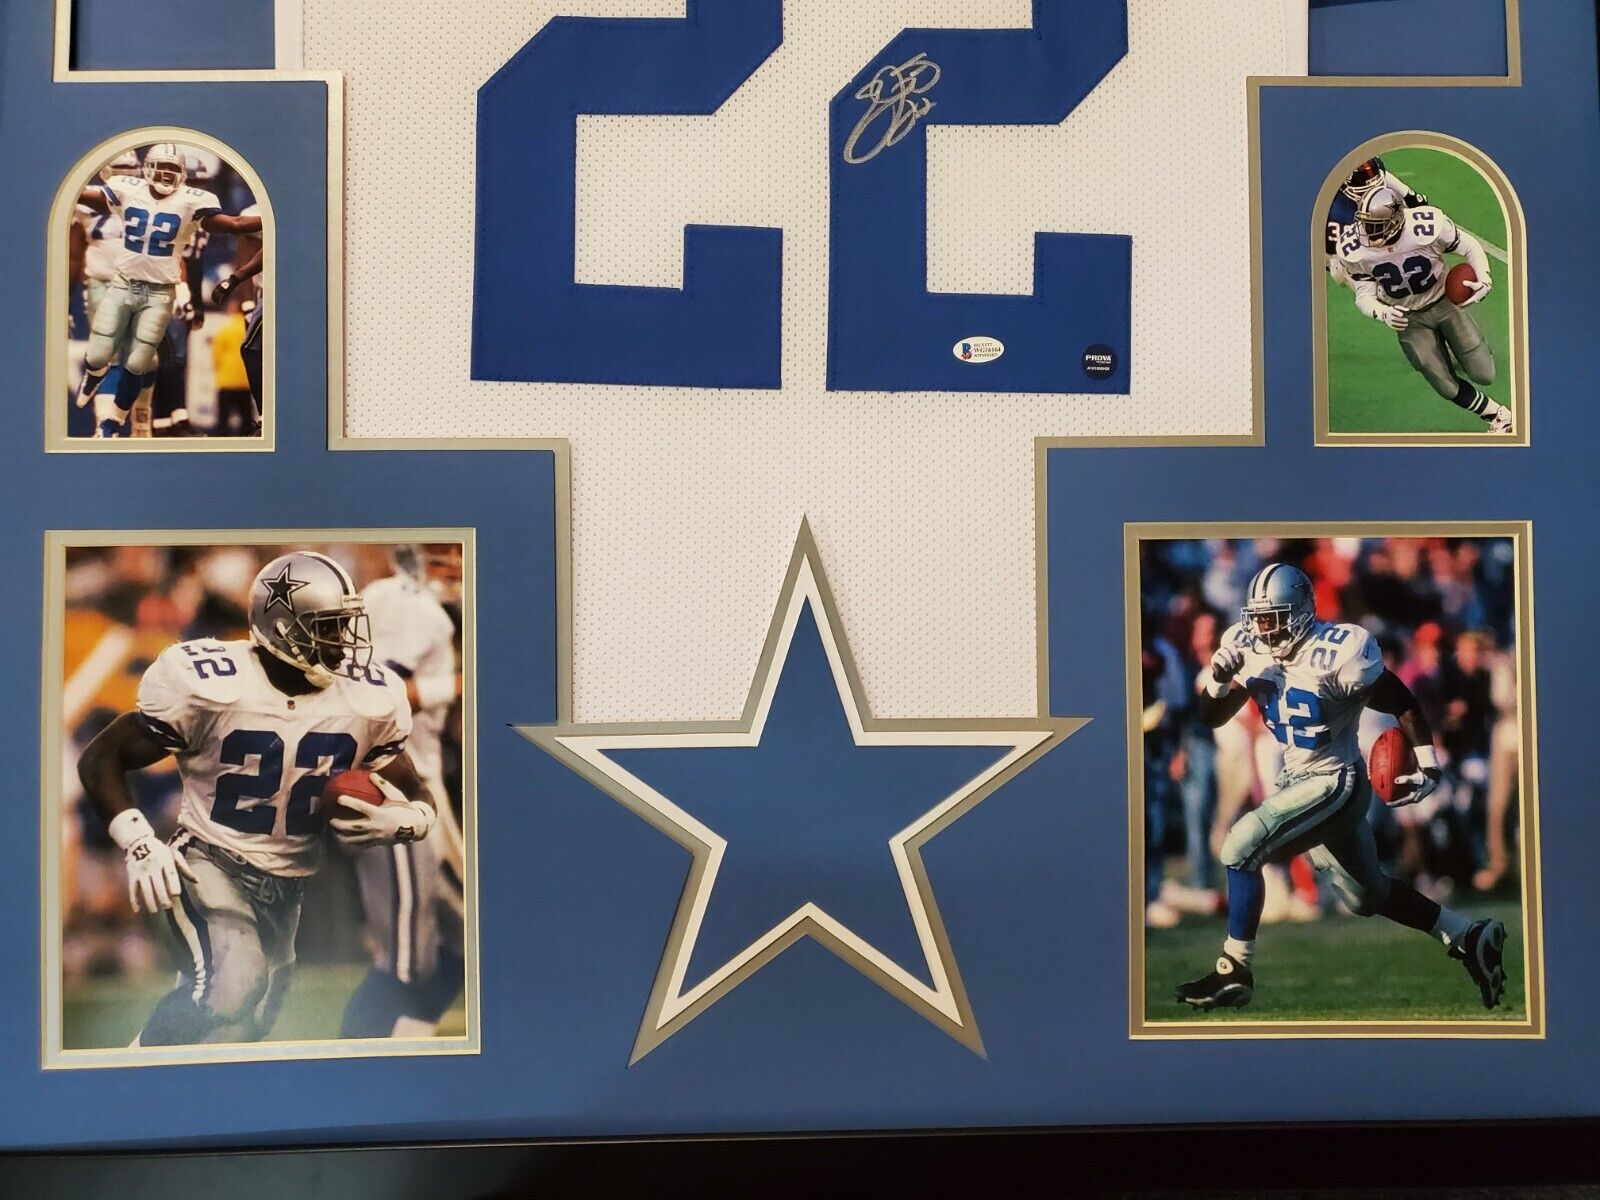 autographed emmitt smith jersey